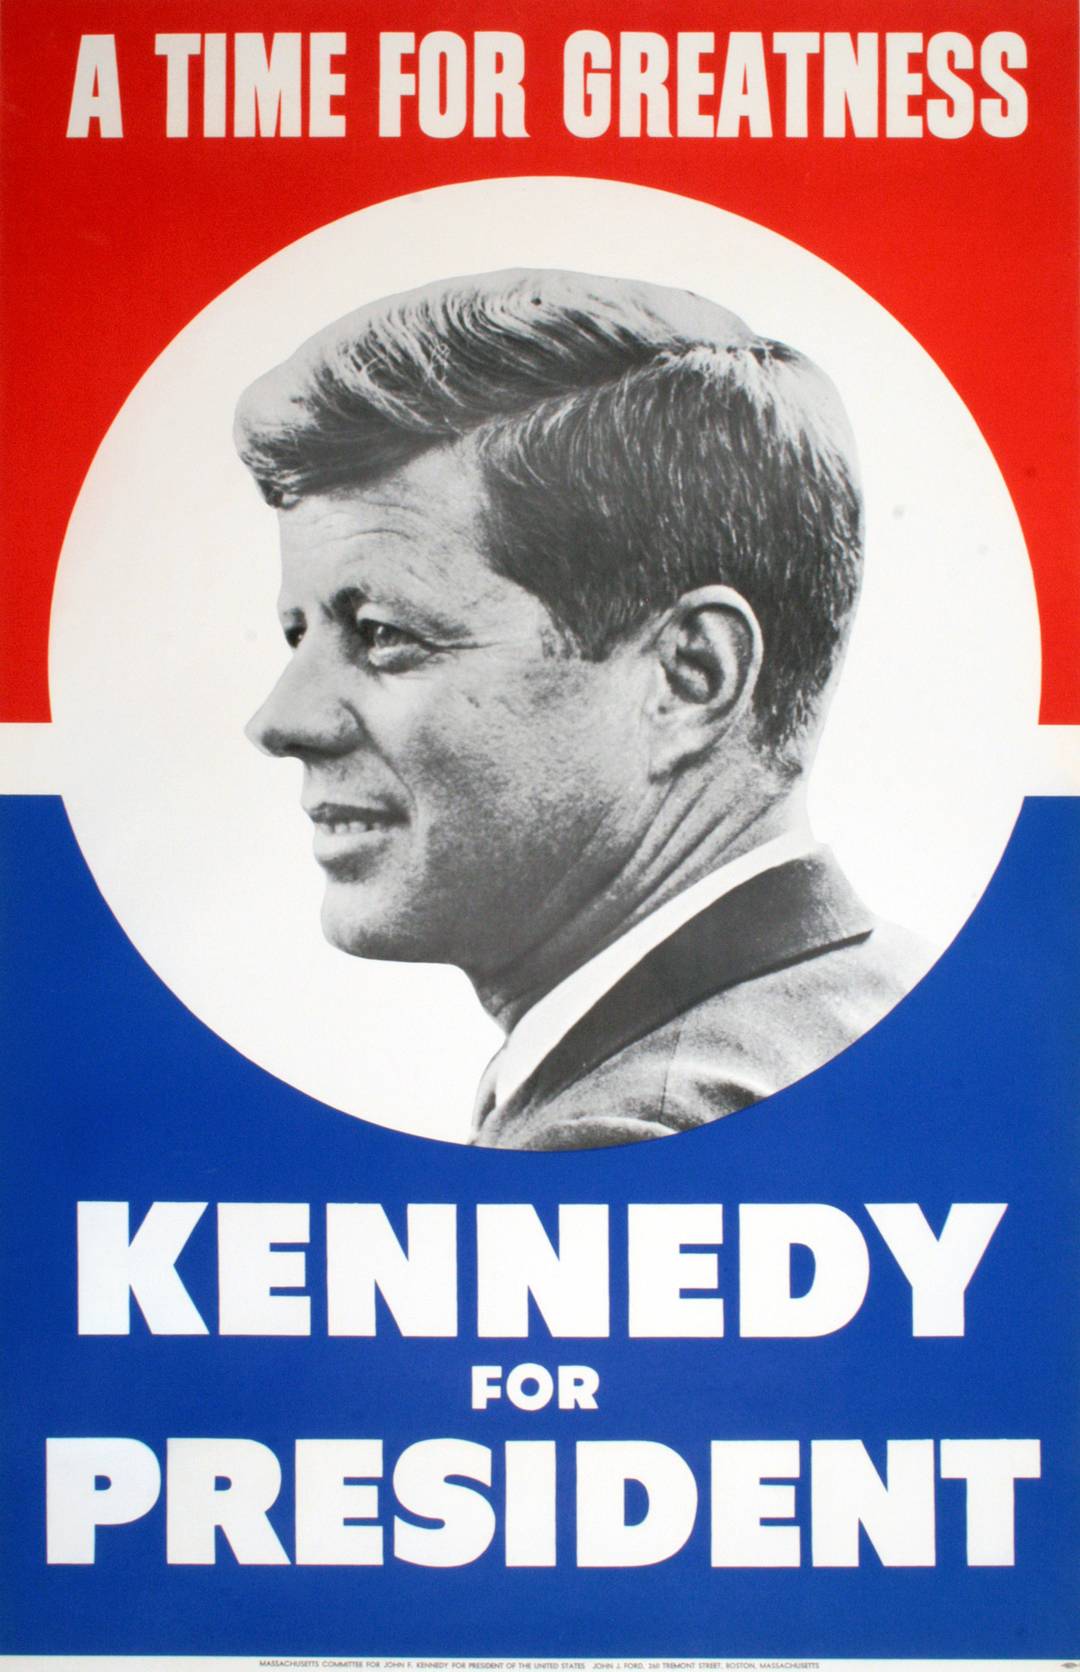 Original 1960 JFK Poster - Kennedy for President - A Time of Greatness